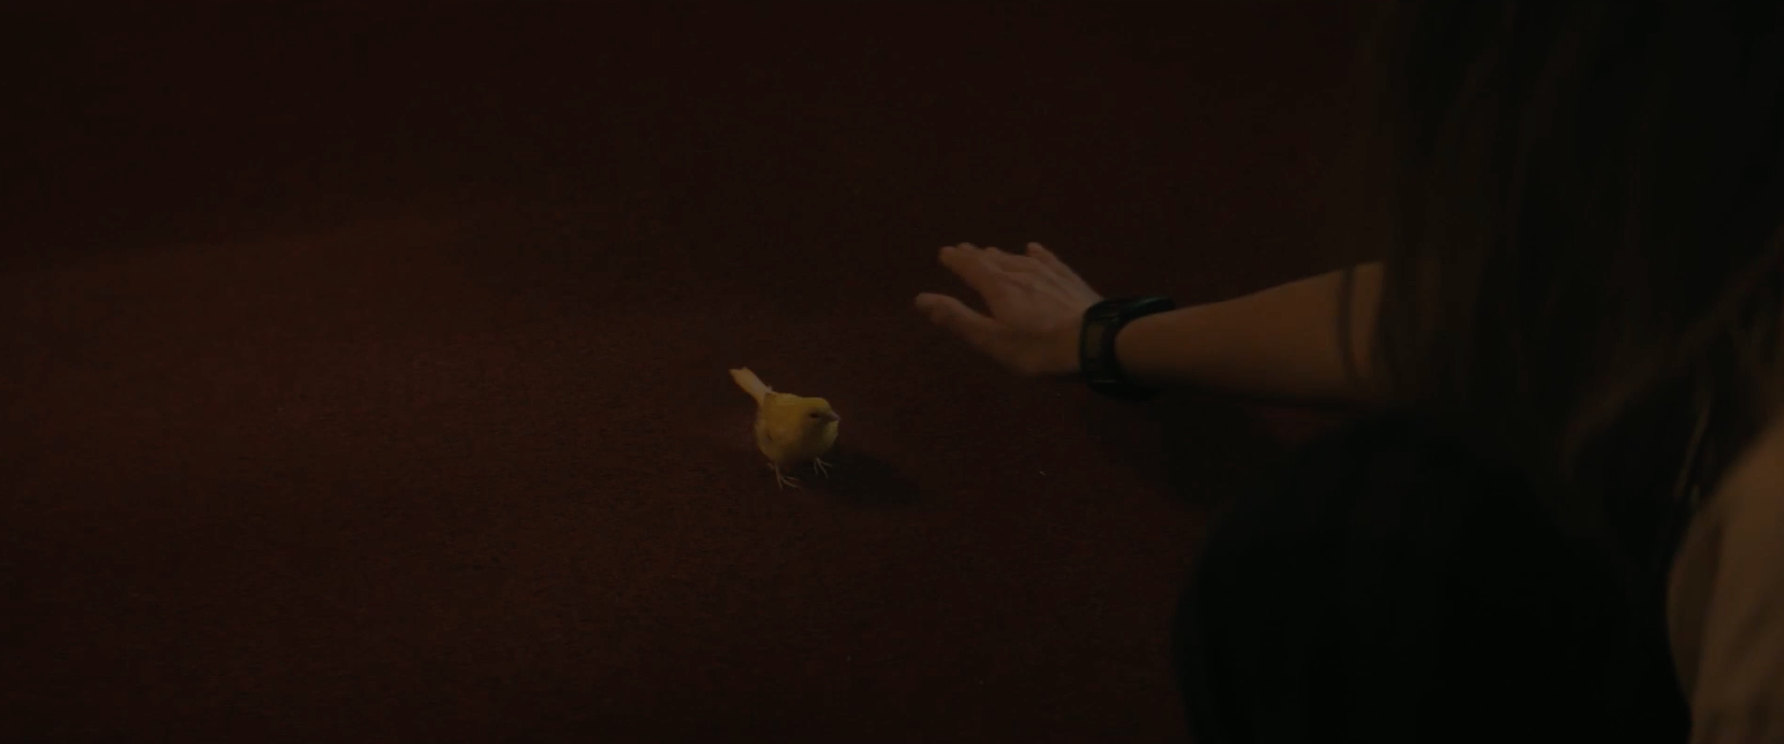 A person wearing a watch extends their arm towards a small yellow bird on the ground